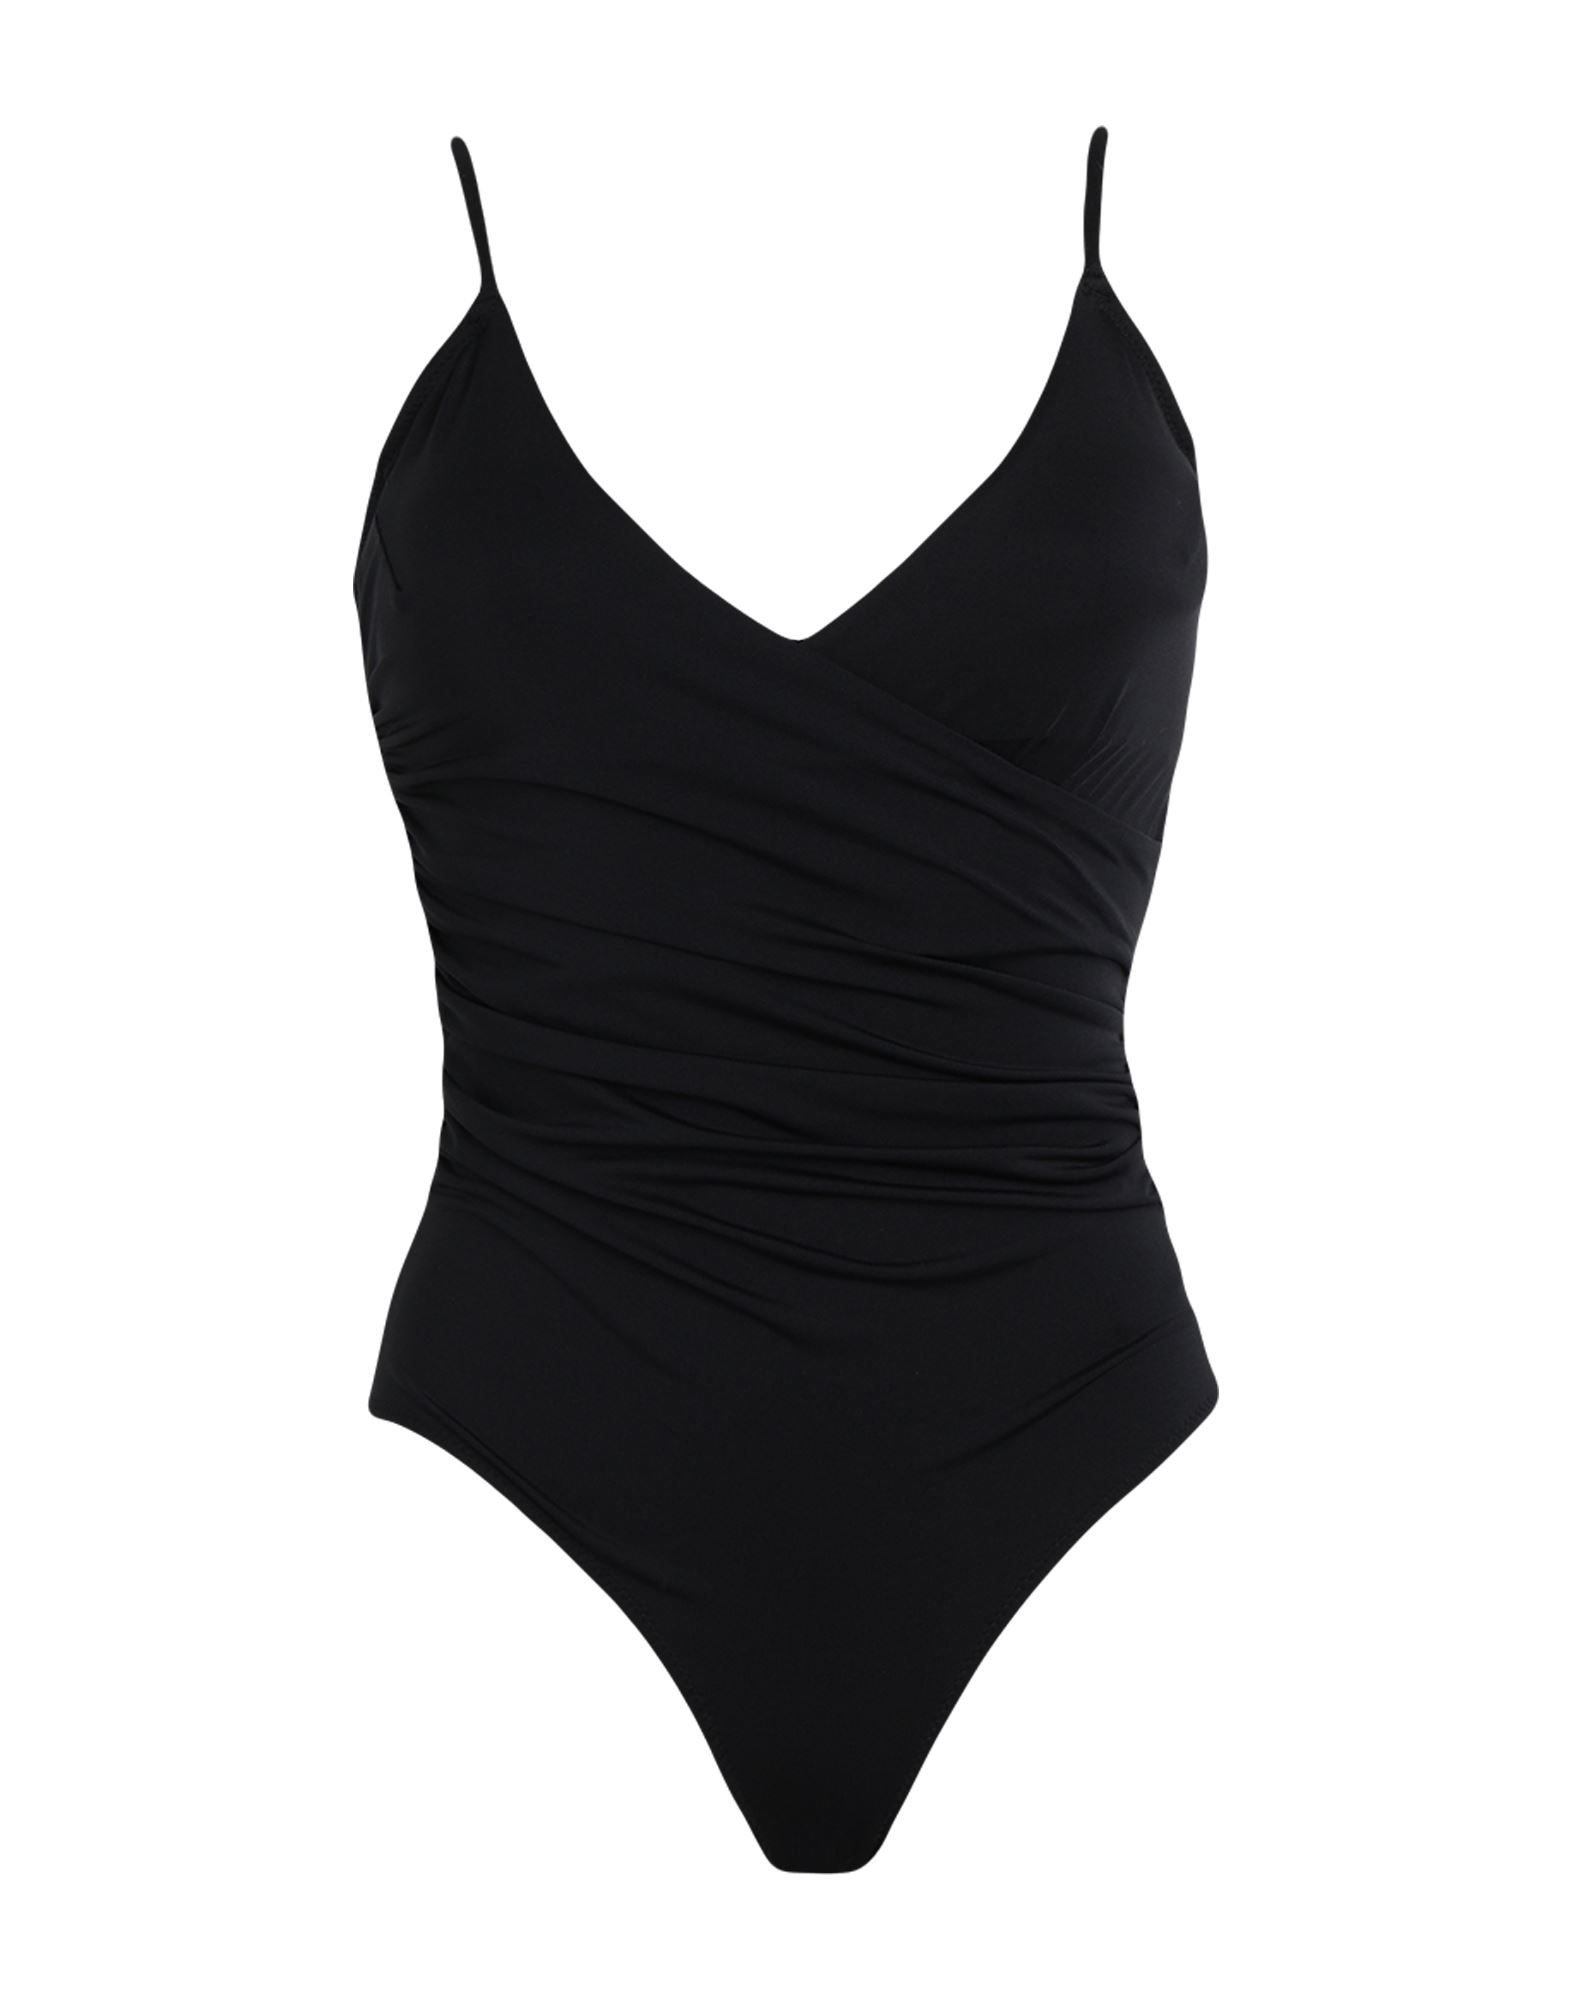 DEDICATED. One-piece swimsuits